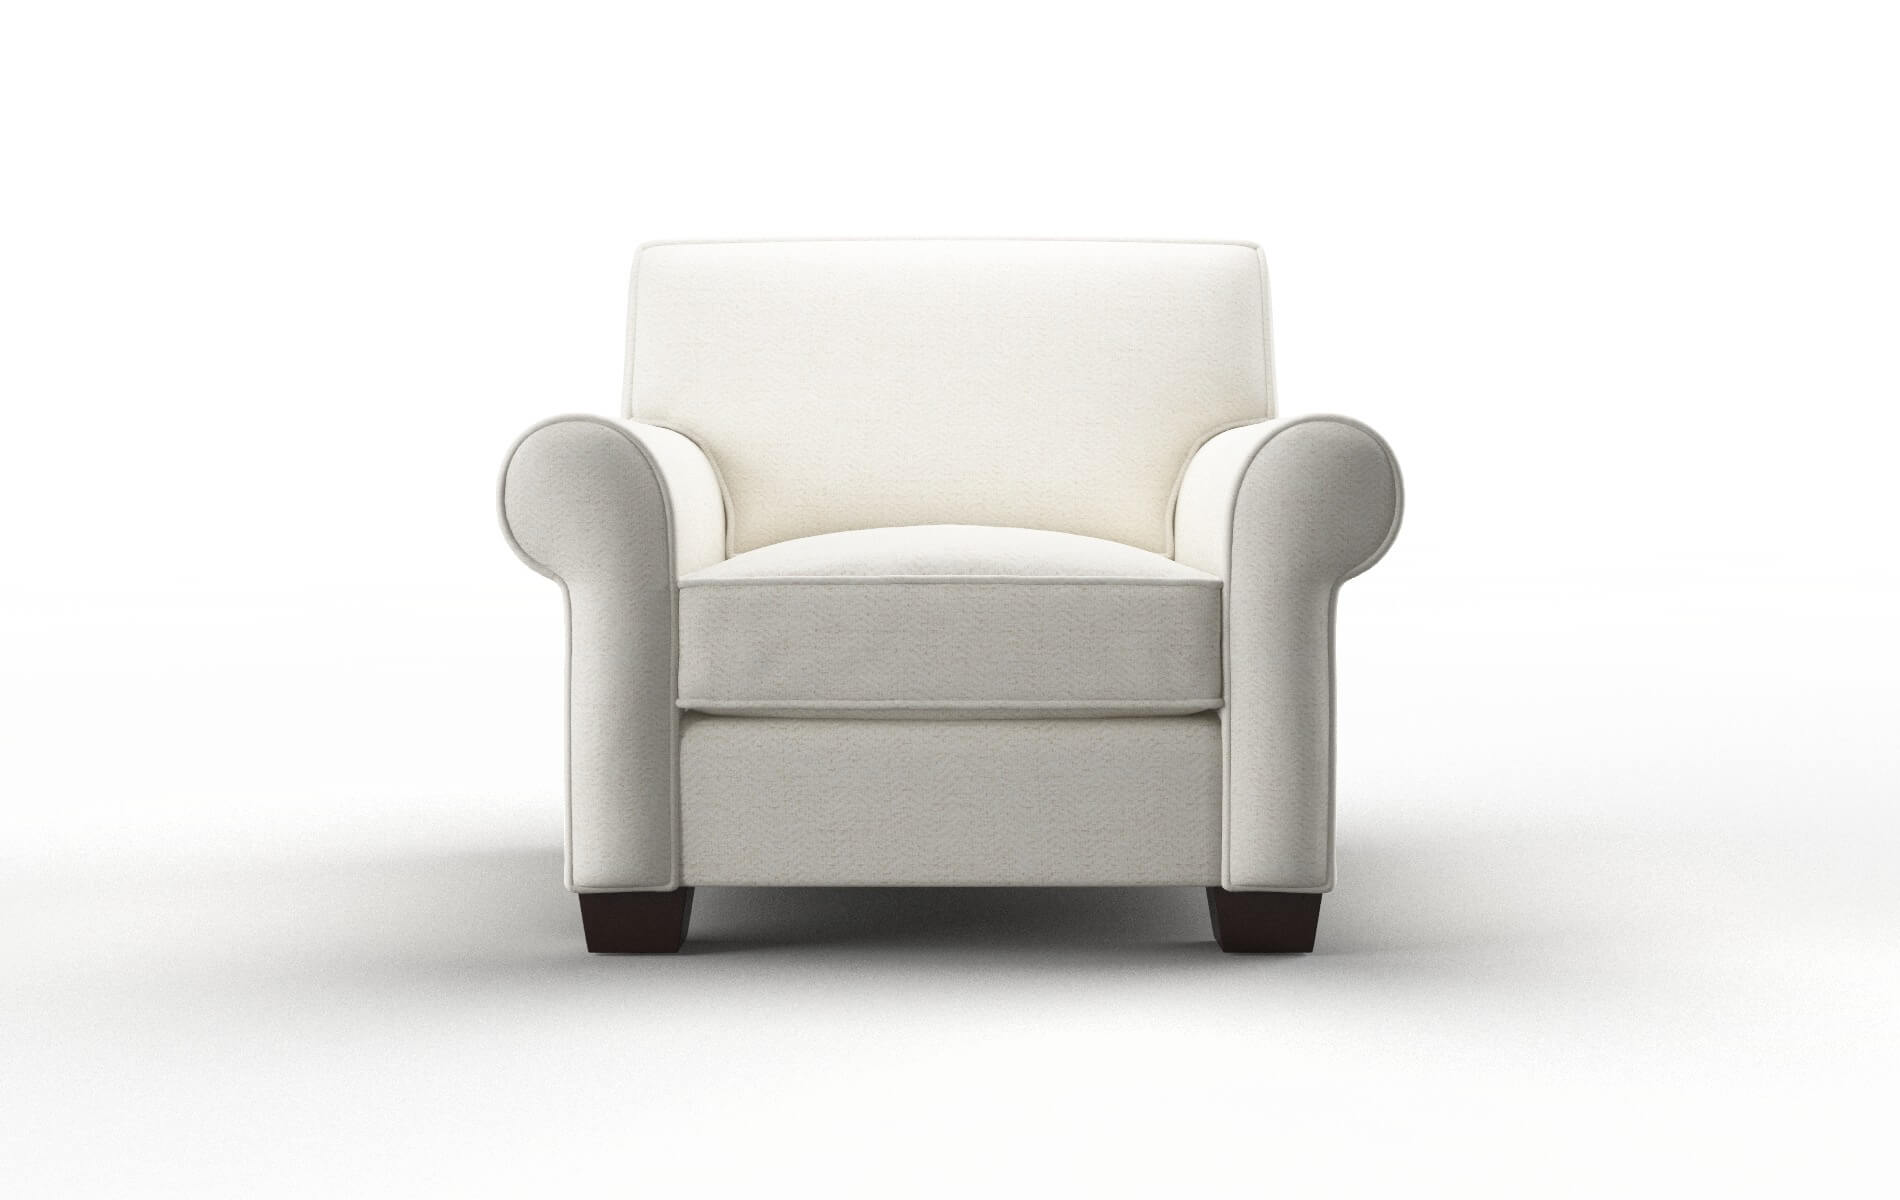 Isabel Catalina Ivory chair espresso legs